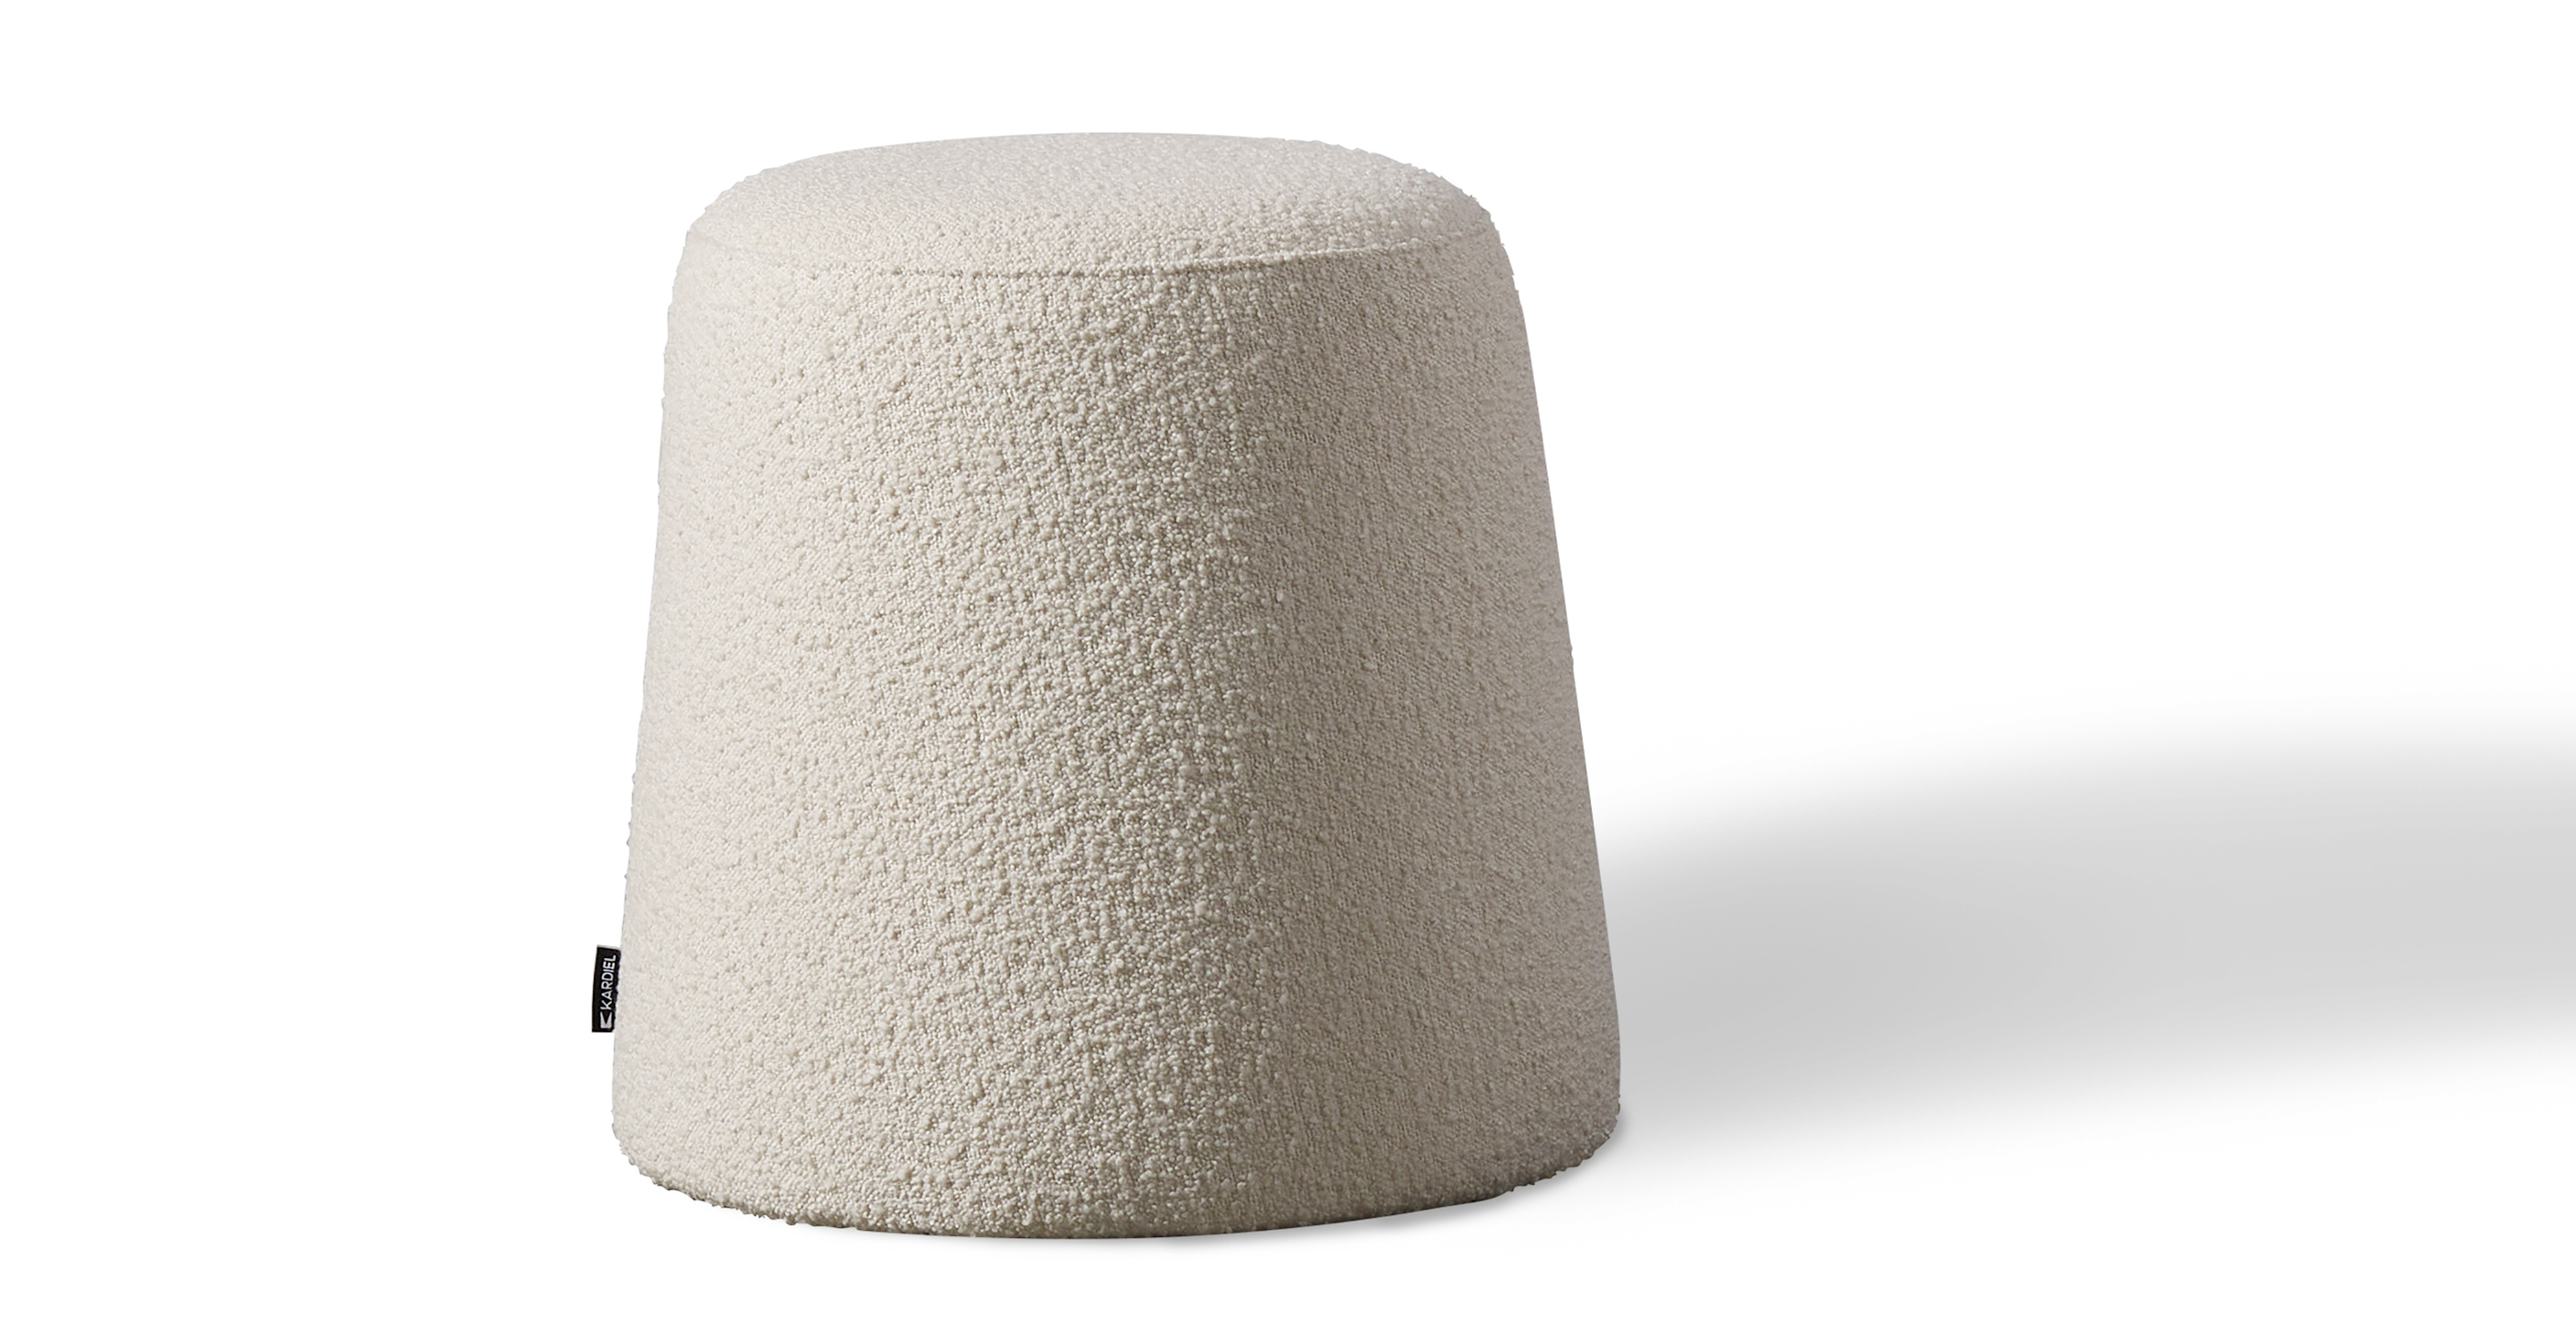 Thimble Cream Boucle is a sewing thimble shaped ottoman starts out wider at the bottom and slightly tapers to the flat top. The top of the 100% upholstered ottoman has a circle piping area to define the top. Because of the flat top, can be used with a tray as a table or extra seating. 